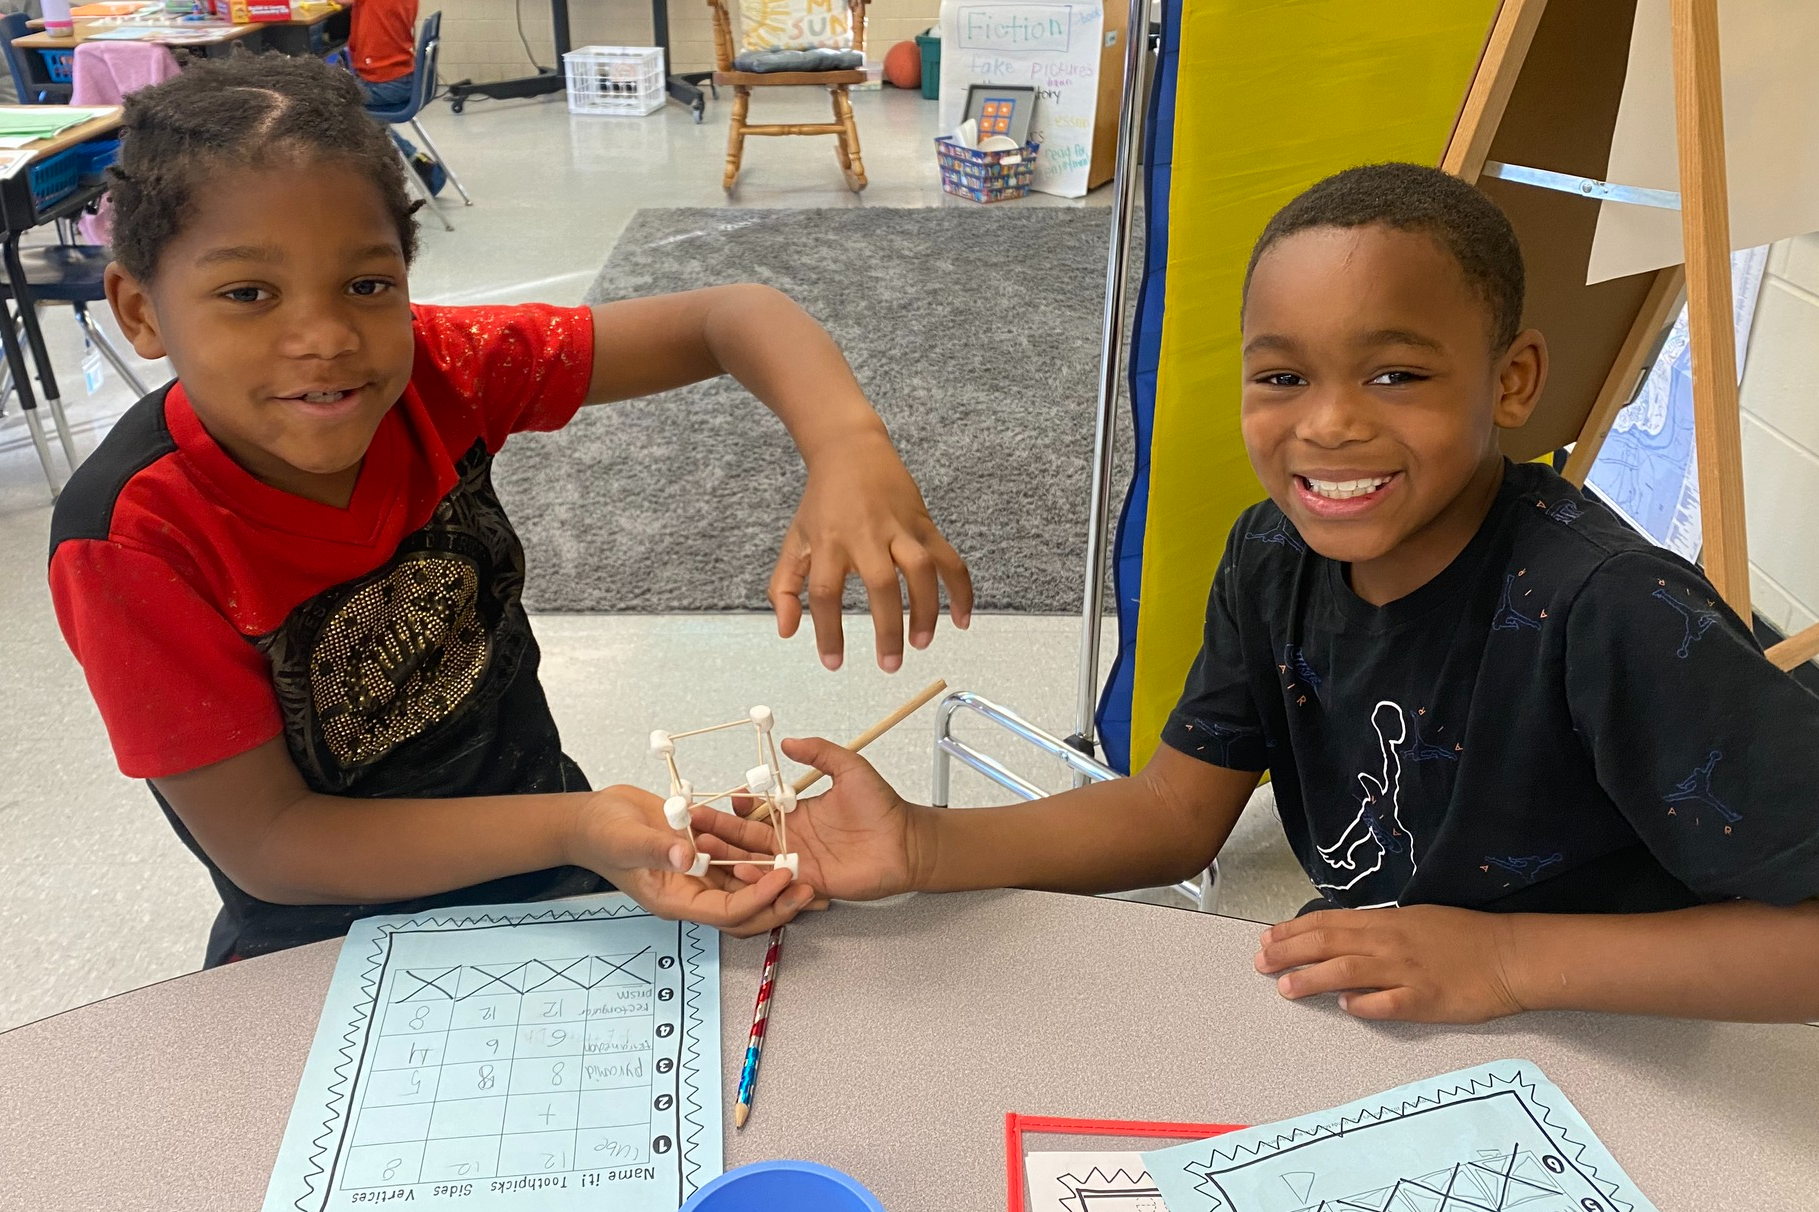 Two elementary-aged black male students proudly hold up a 3D shape they constructed out of marshmallows and toothpicks.